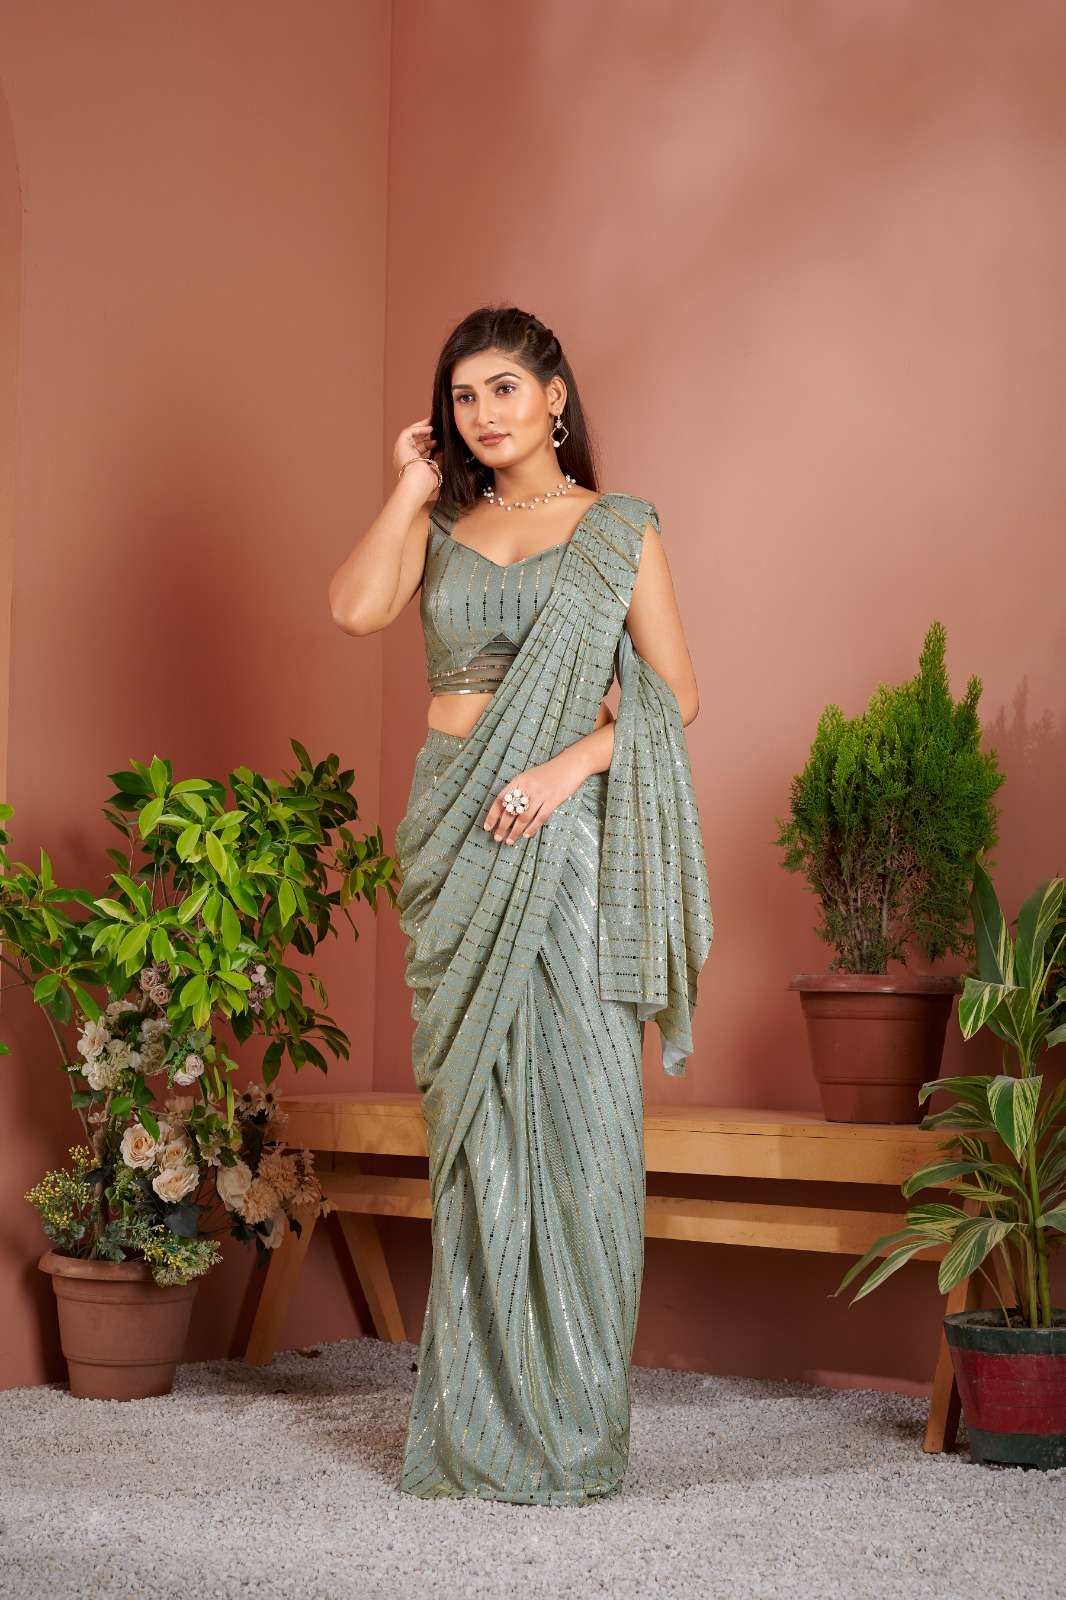 Party Wear Ready To Wear Saree at Rs 2095.00, Fancy Sarees